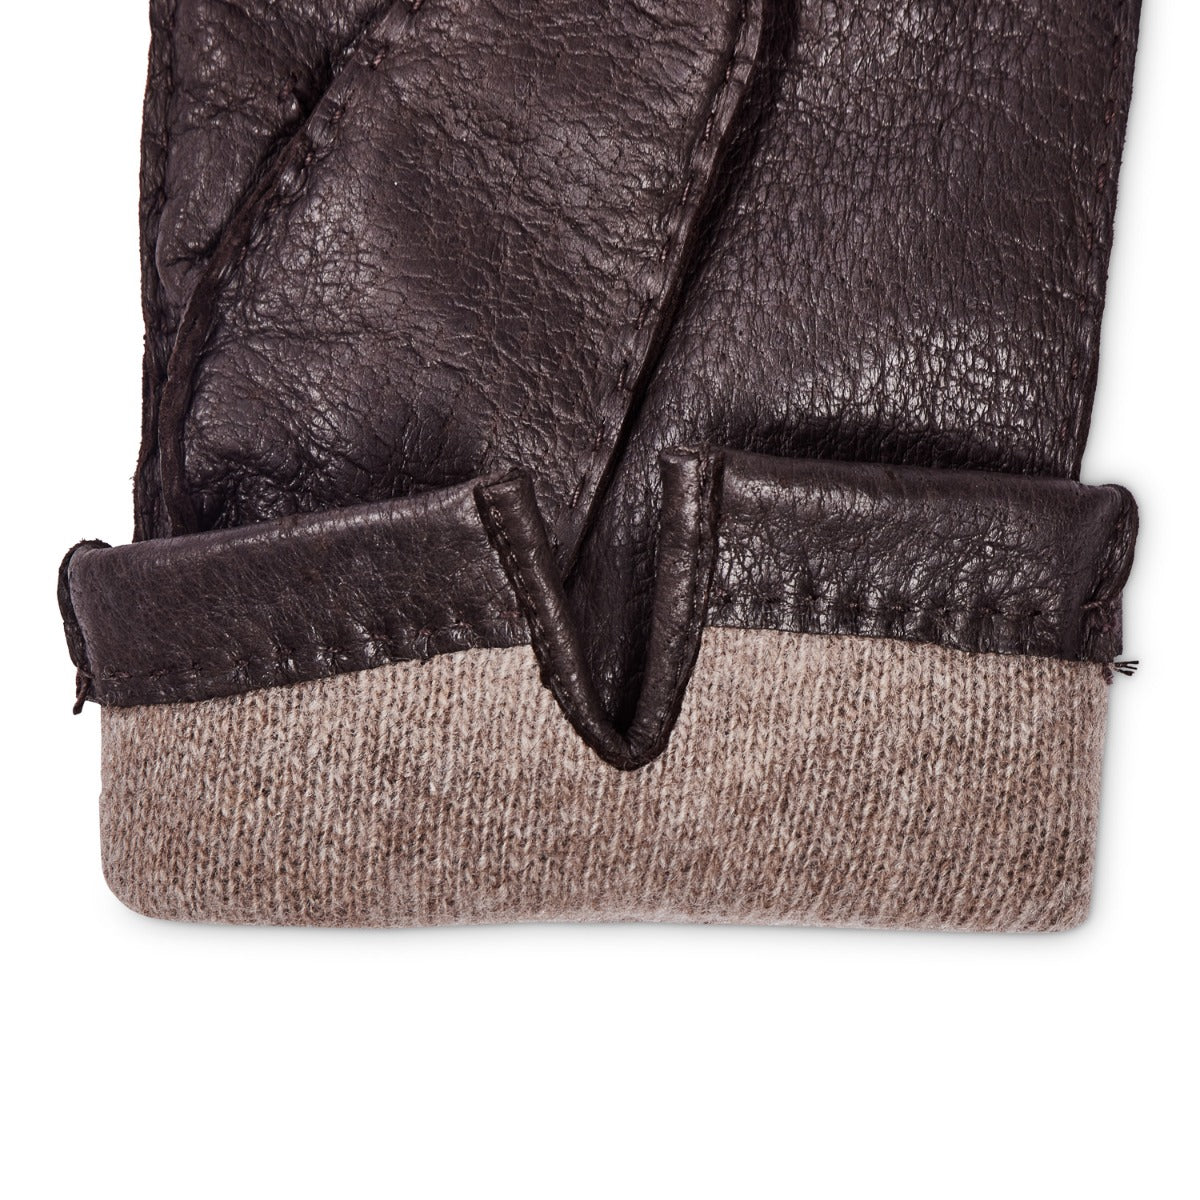 A pair of KirbyAllison.com Sovereign Grade Dark Brown Peccary Leather Gloves, Cashmere Lined on a white surface.